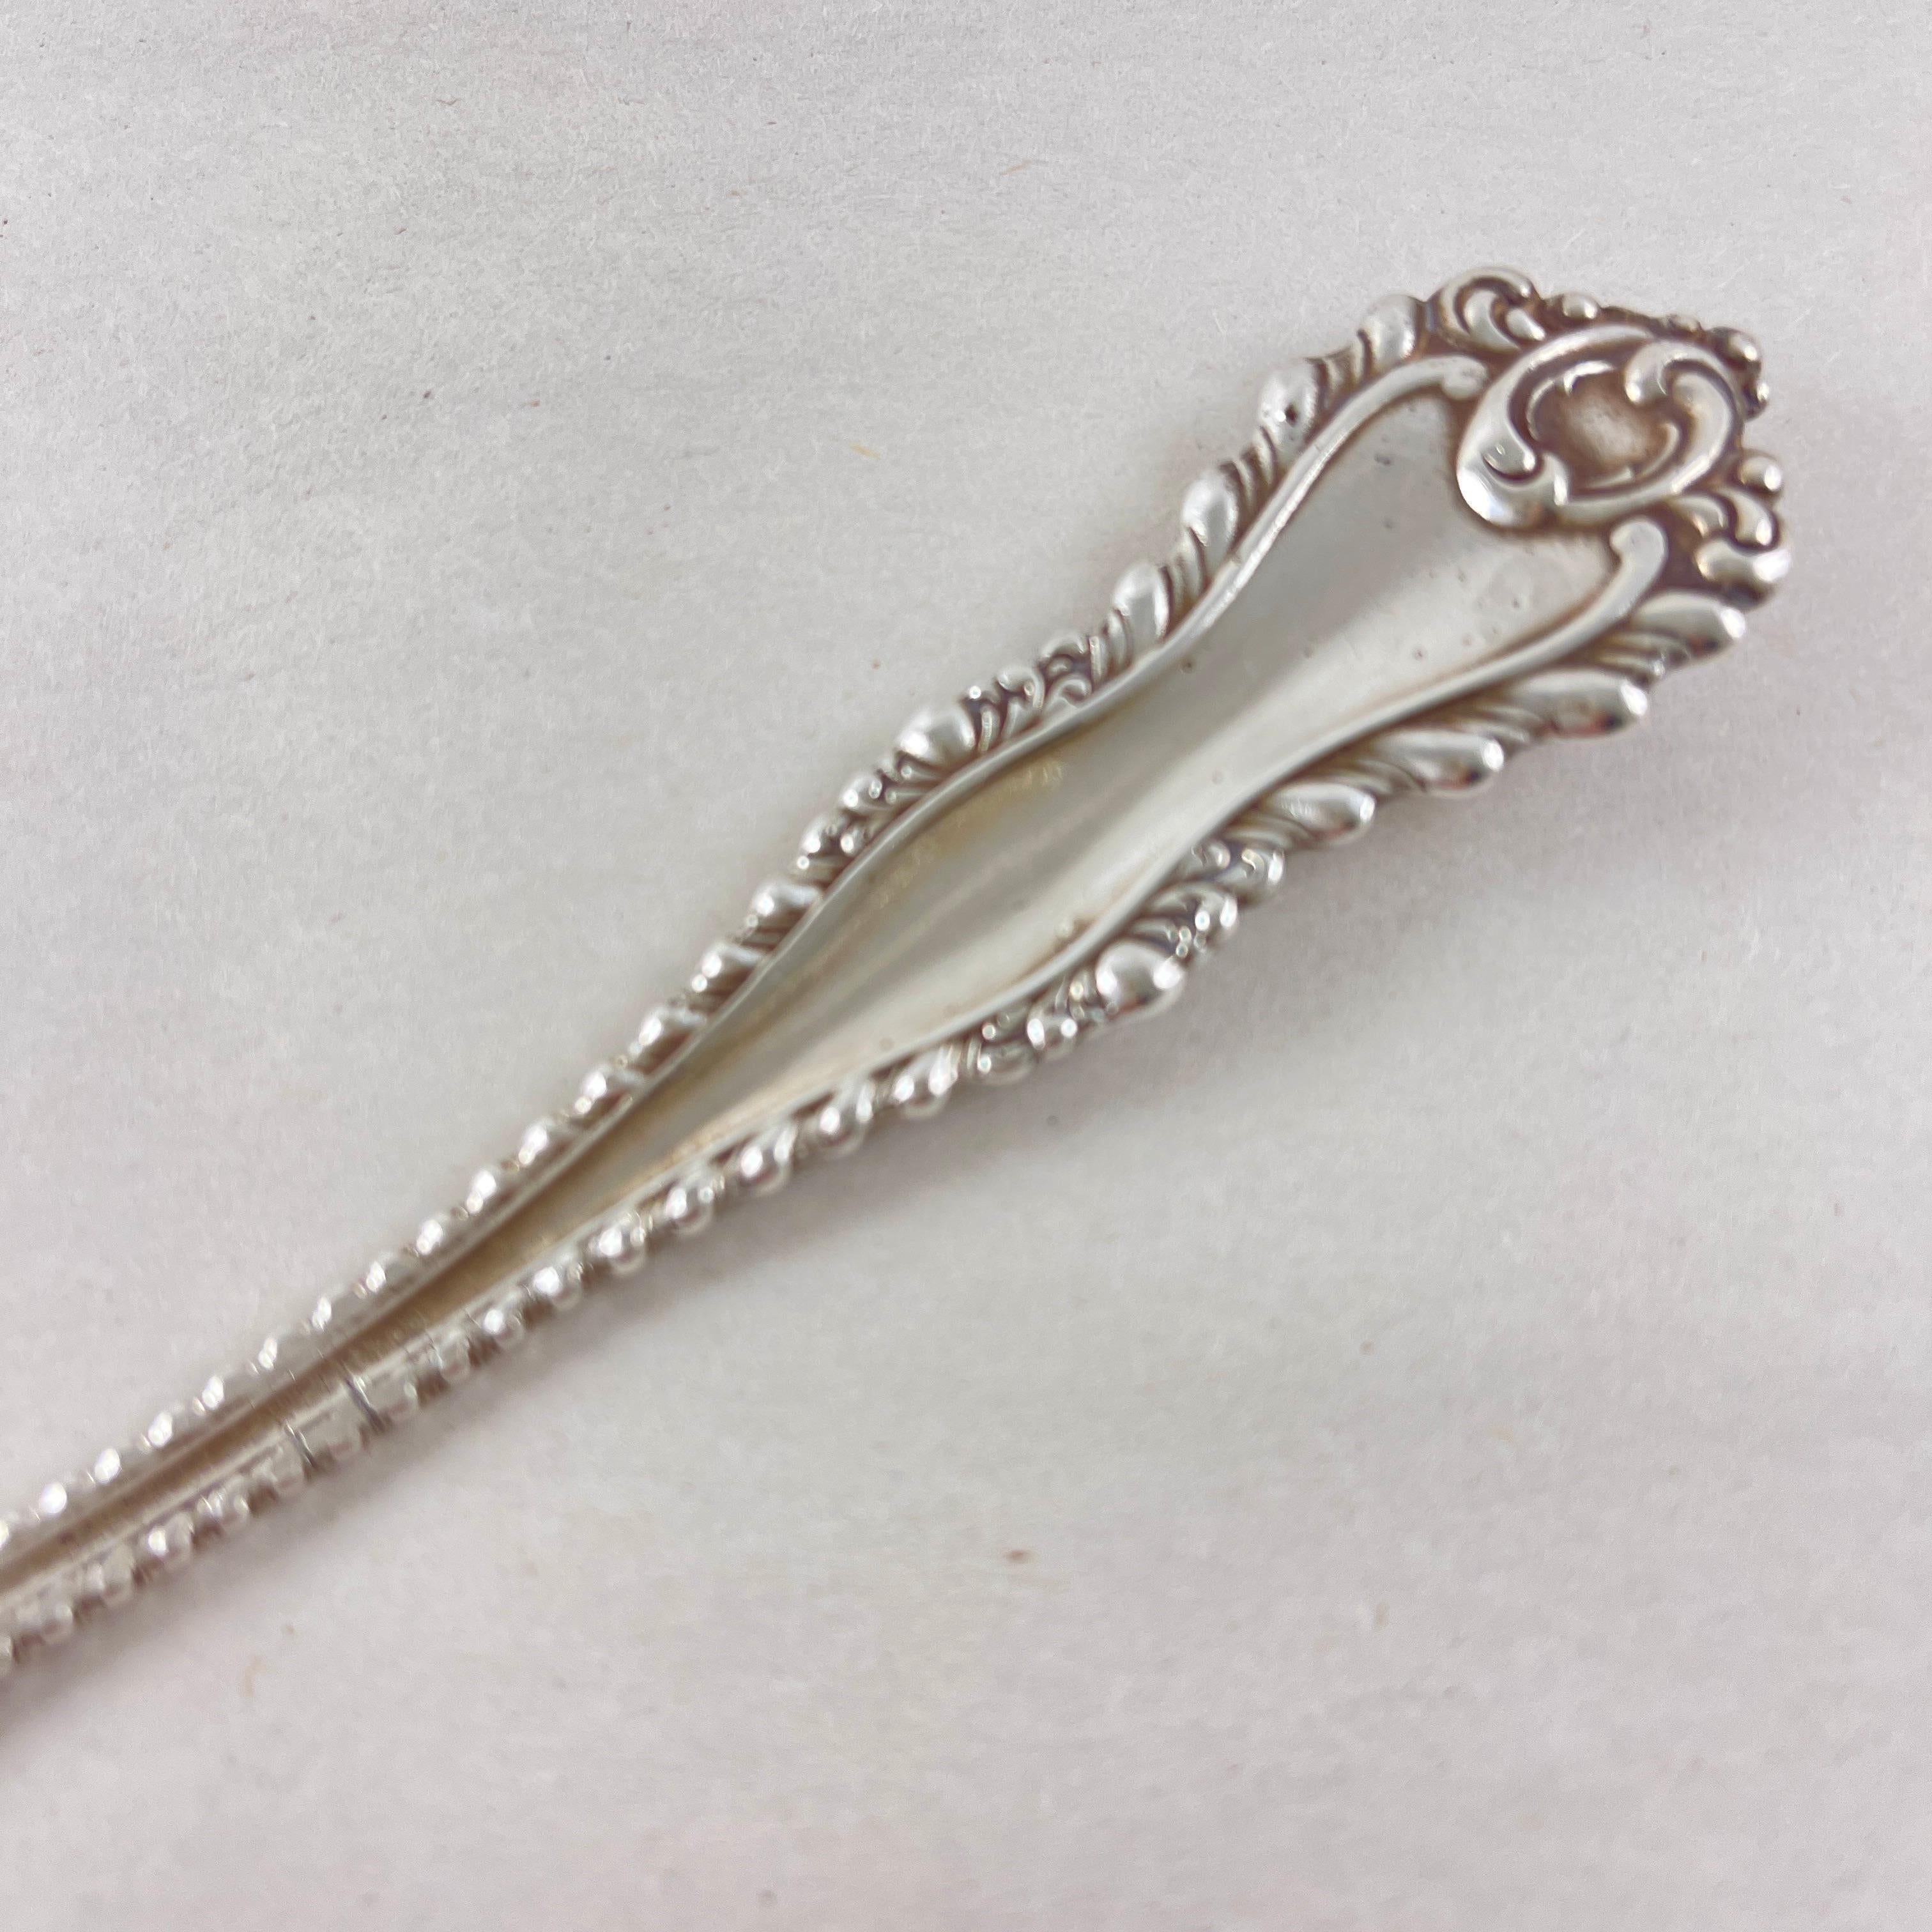 Dominick & Haff Estate Sterling Silver Hand Made Slotted Spoon, 1892 For Sale 3